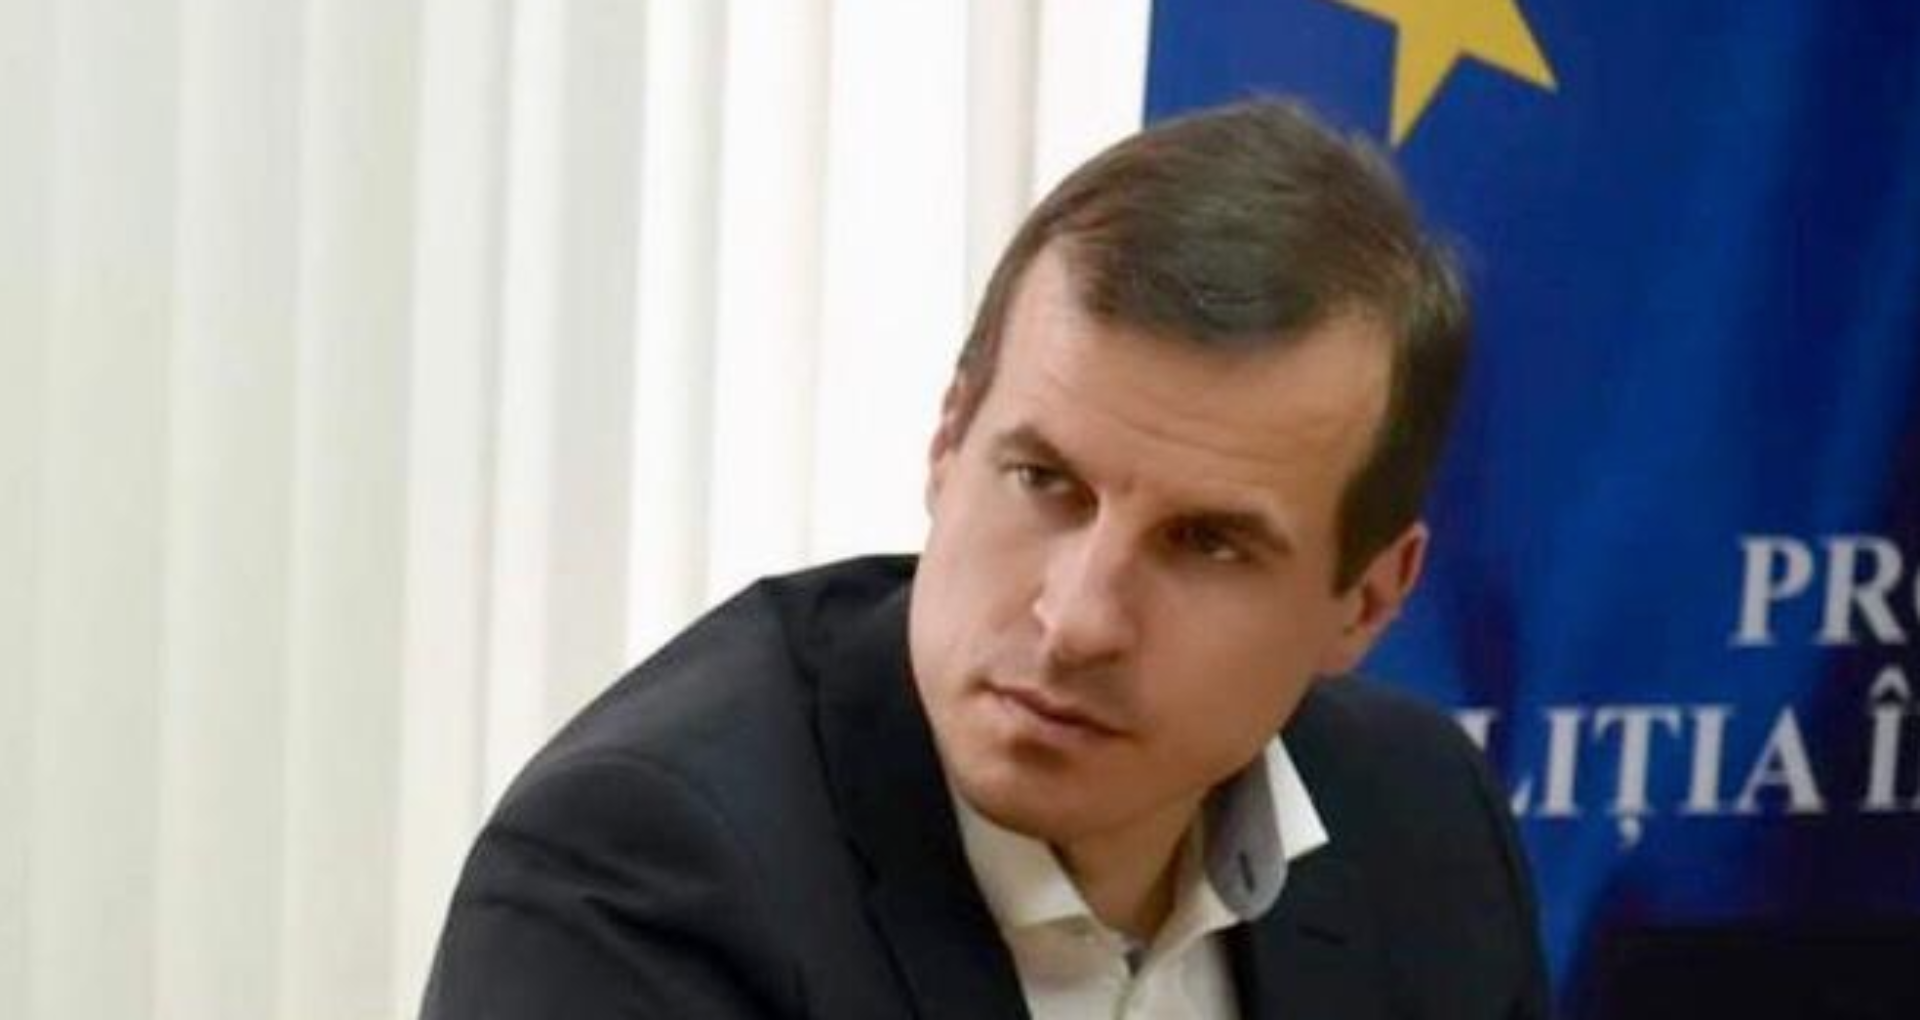 Prosecutors refused to receive the complaint of the former mayor of Chisinau, Dorin Chirtoaca, regarding the alleged illegal actions committed by acting Prosecutor General Dumitru Robu